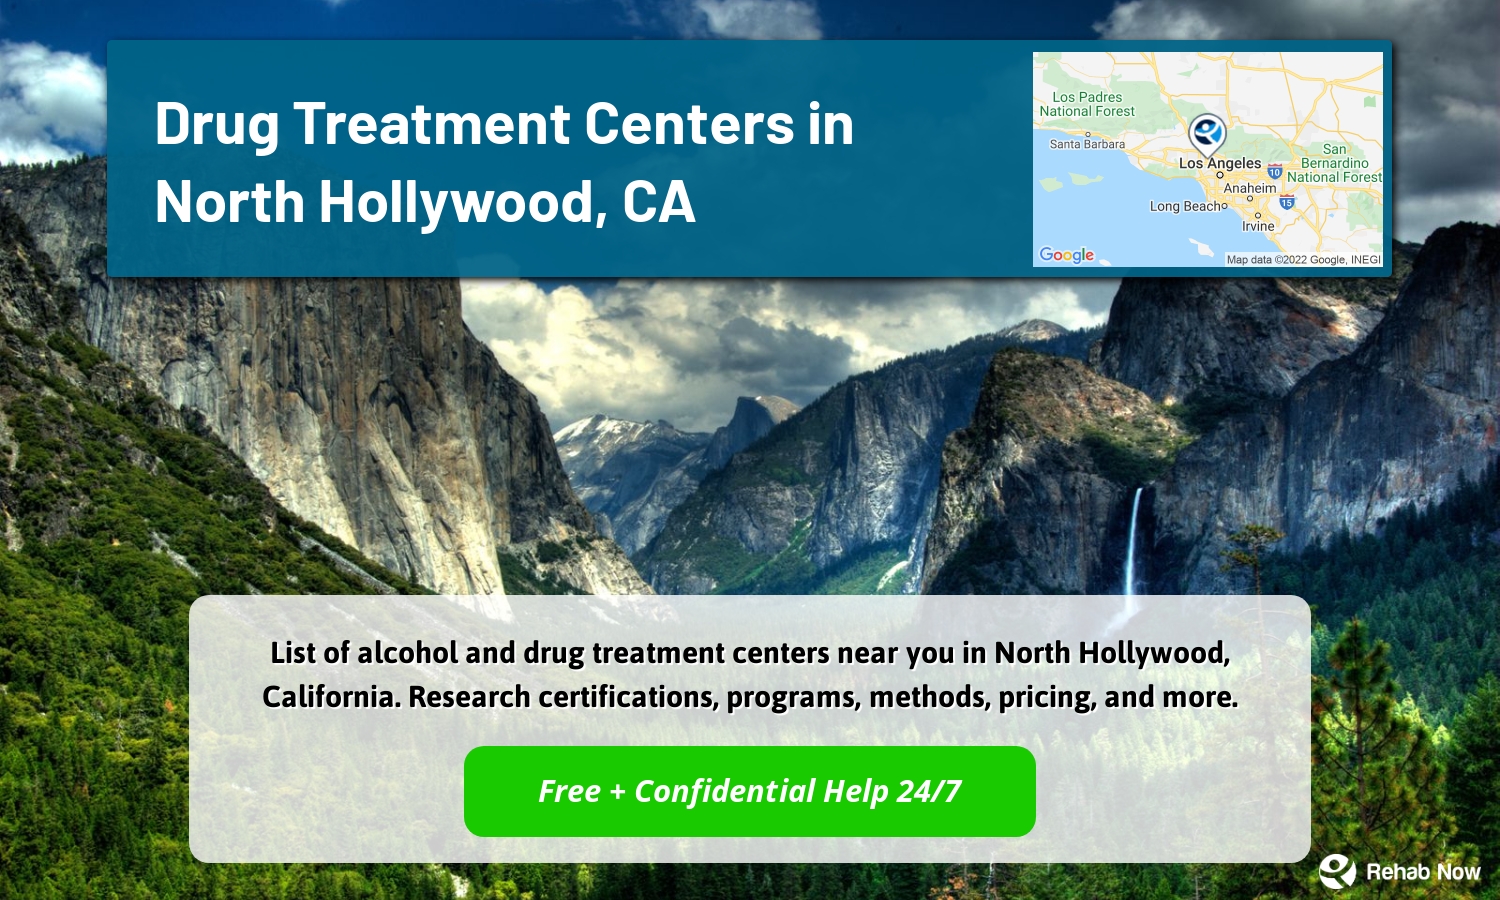 List of alcohol and drug treatment centers near you in North Hollywood, California. Research certifications, programs, methods, pricing, and more.